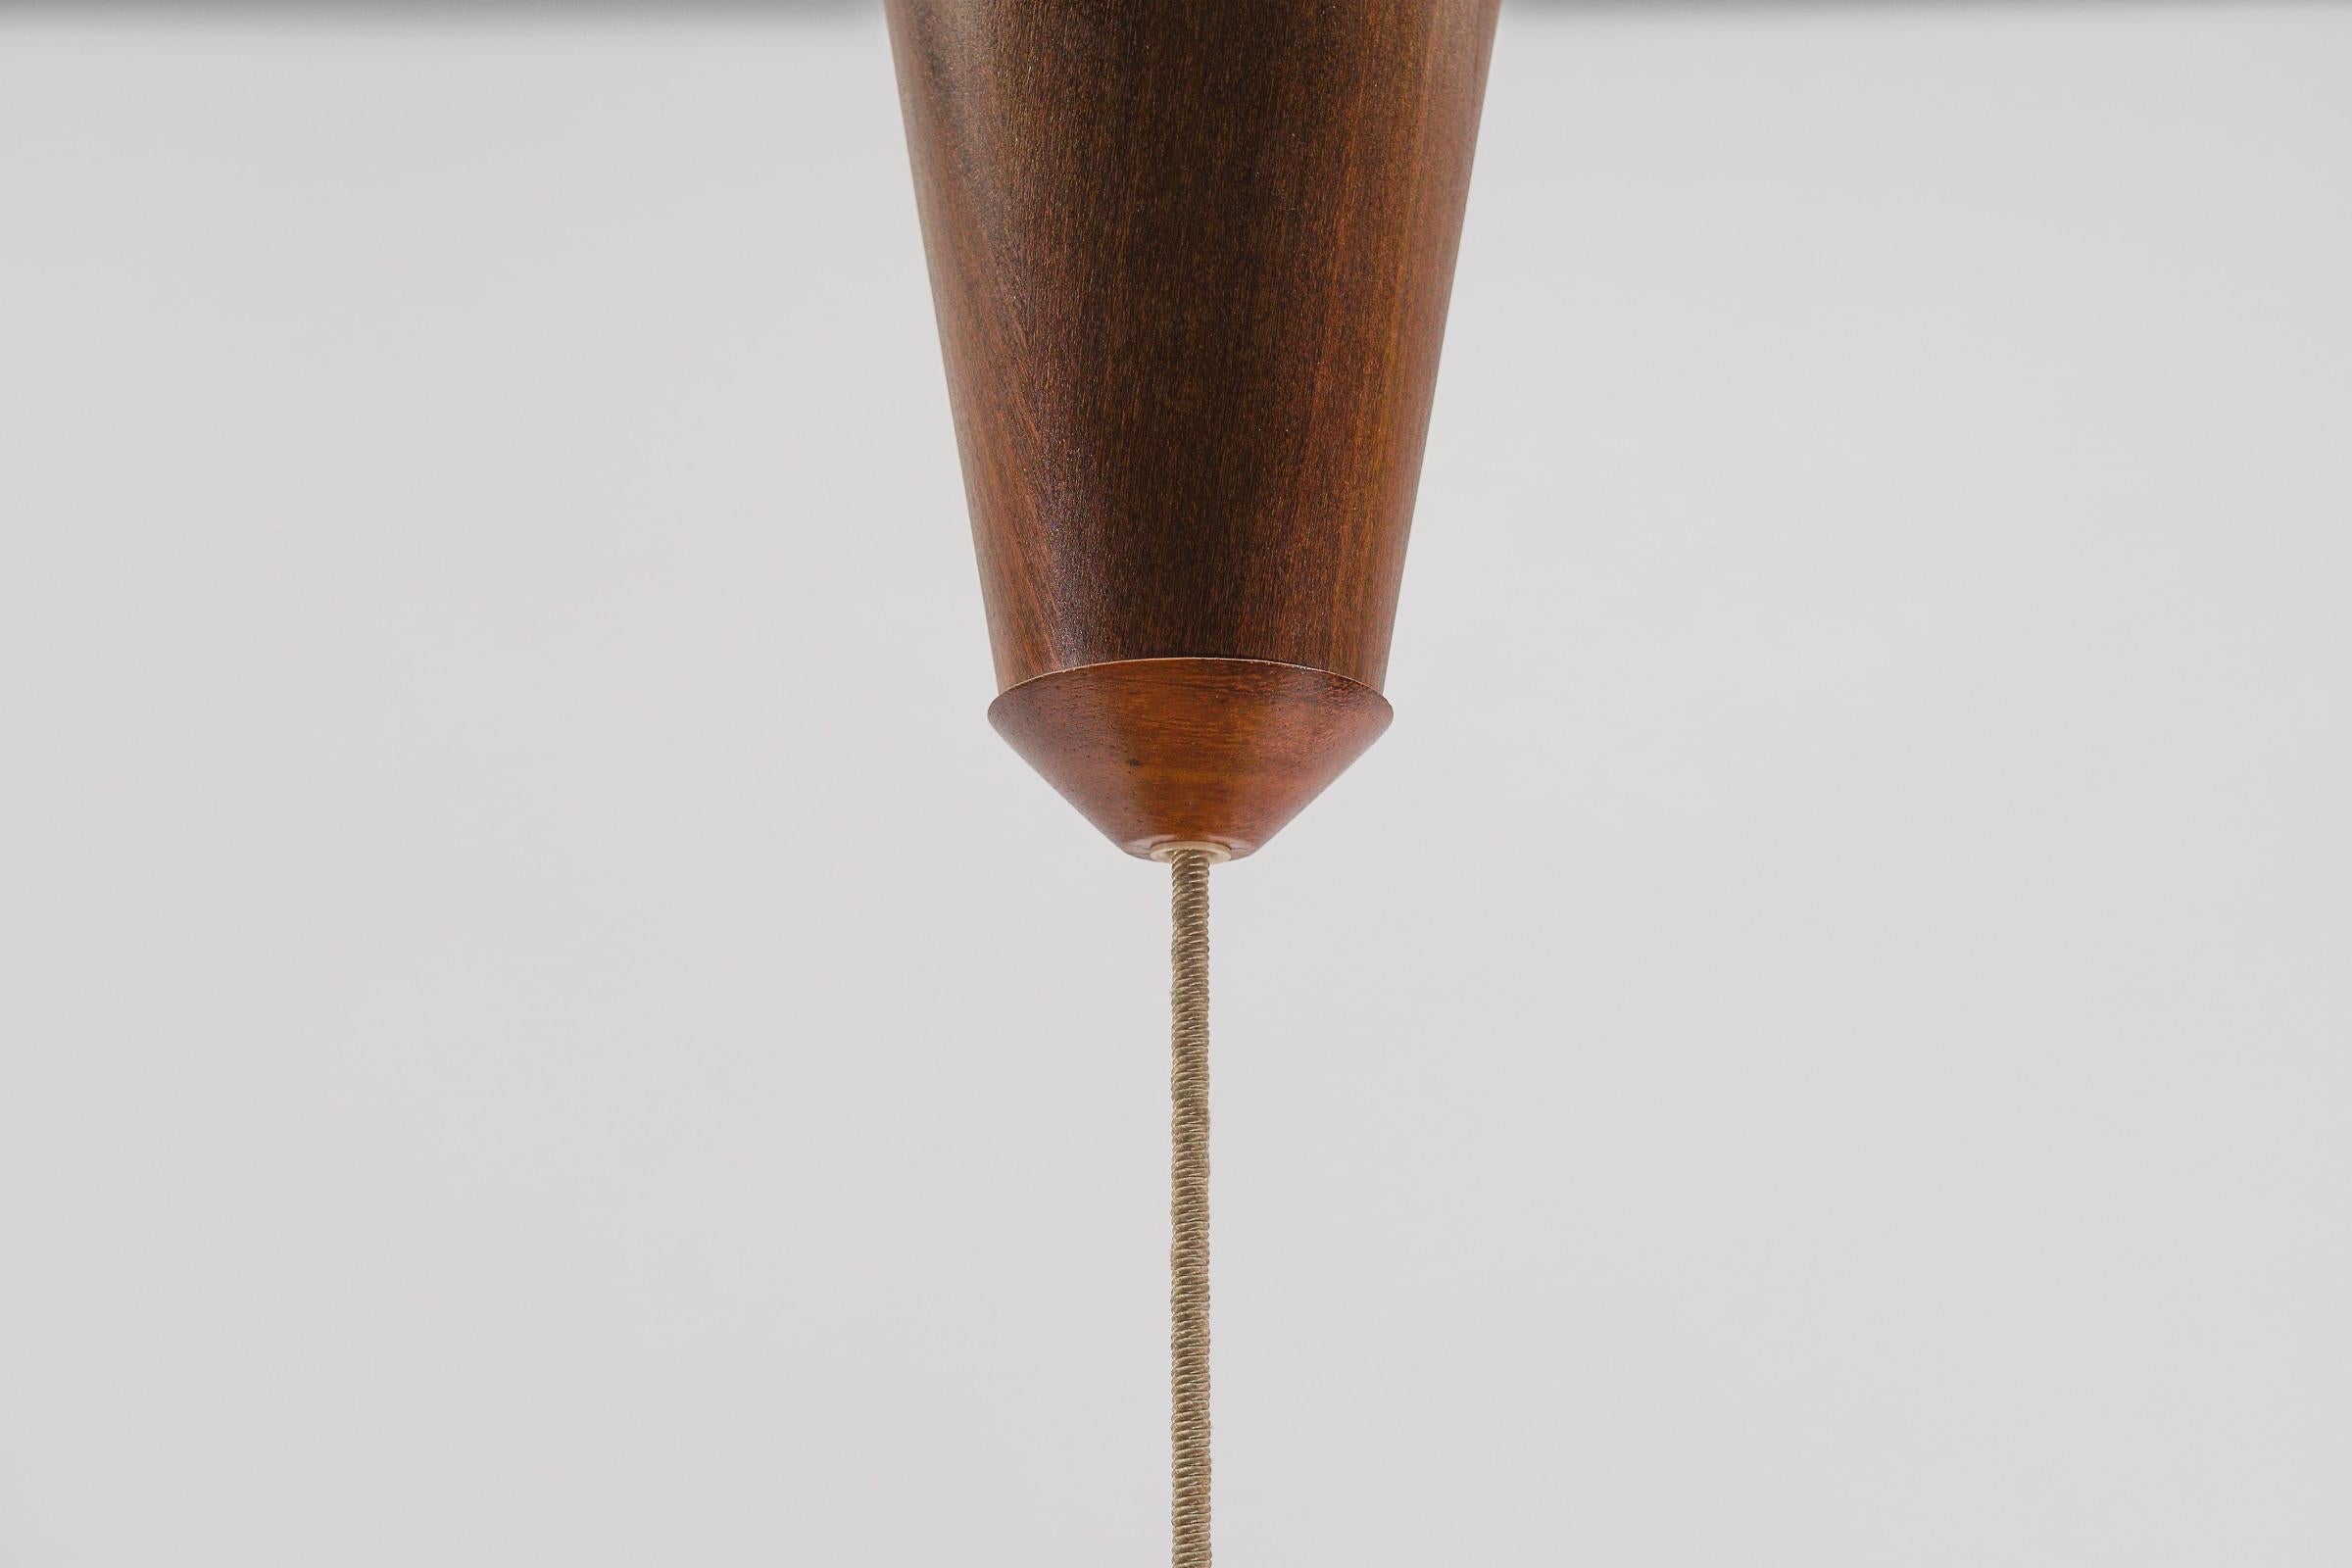 Lovely Adjustable Ceiling Lamp Made in Teak and Jute by Temde Swiss, 1960s For Sale 5